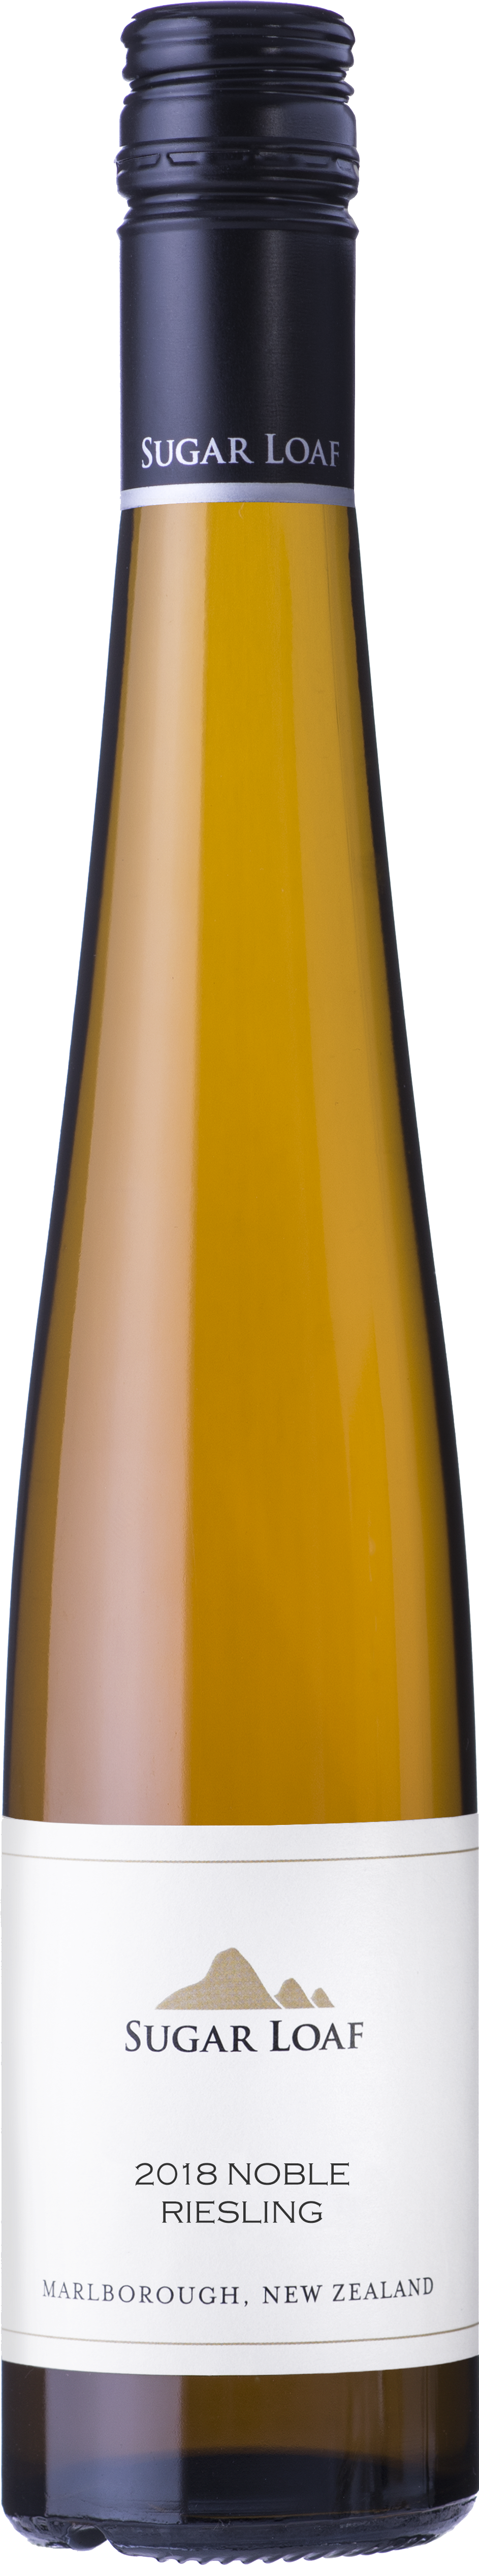 Noble Riesling 2018